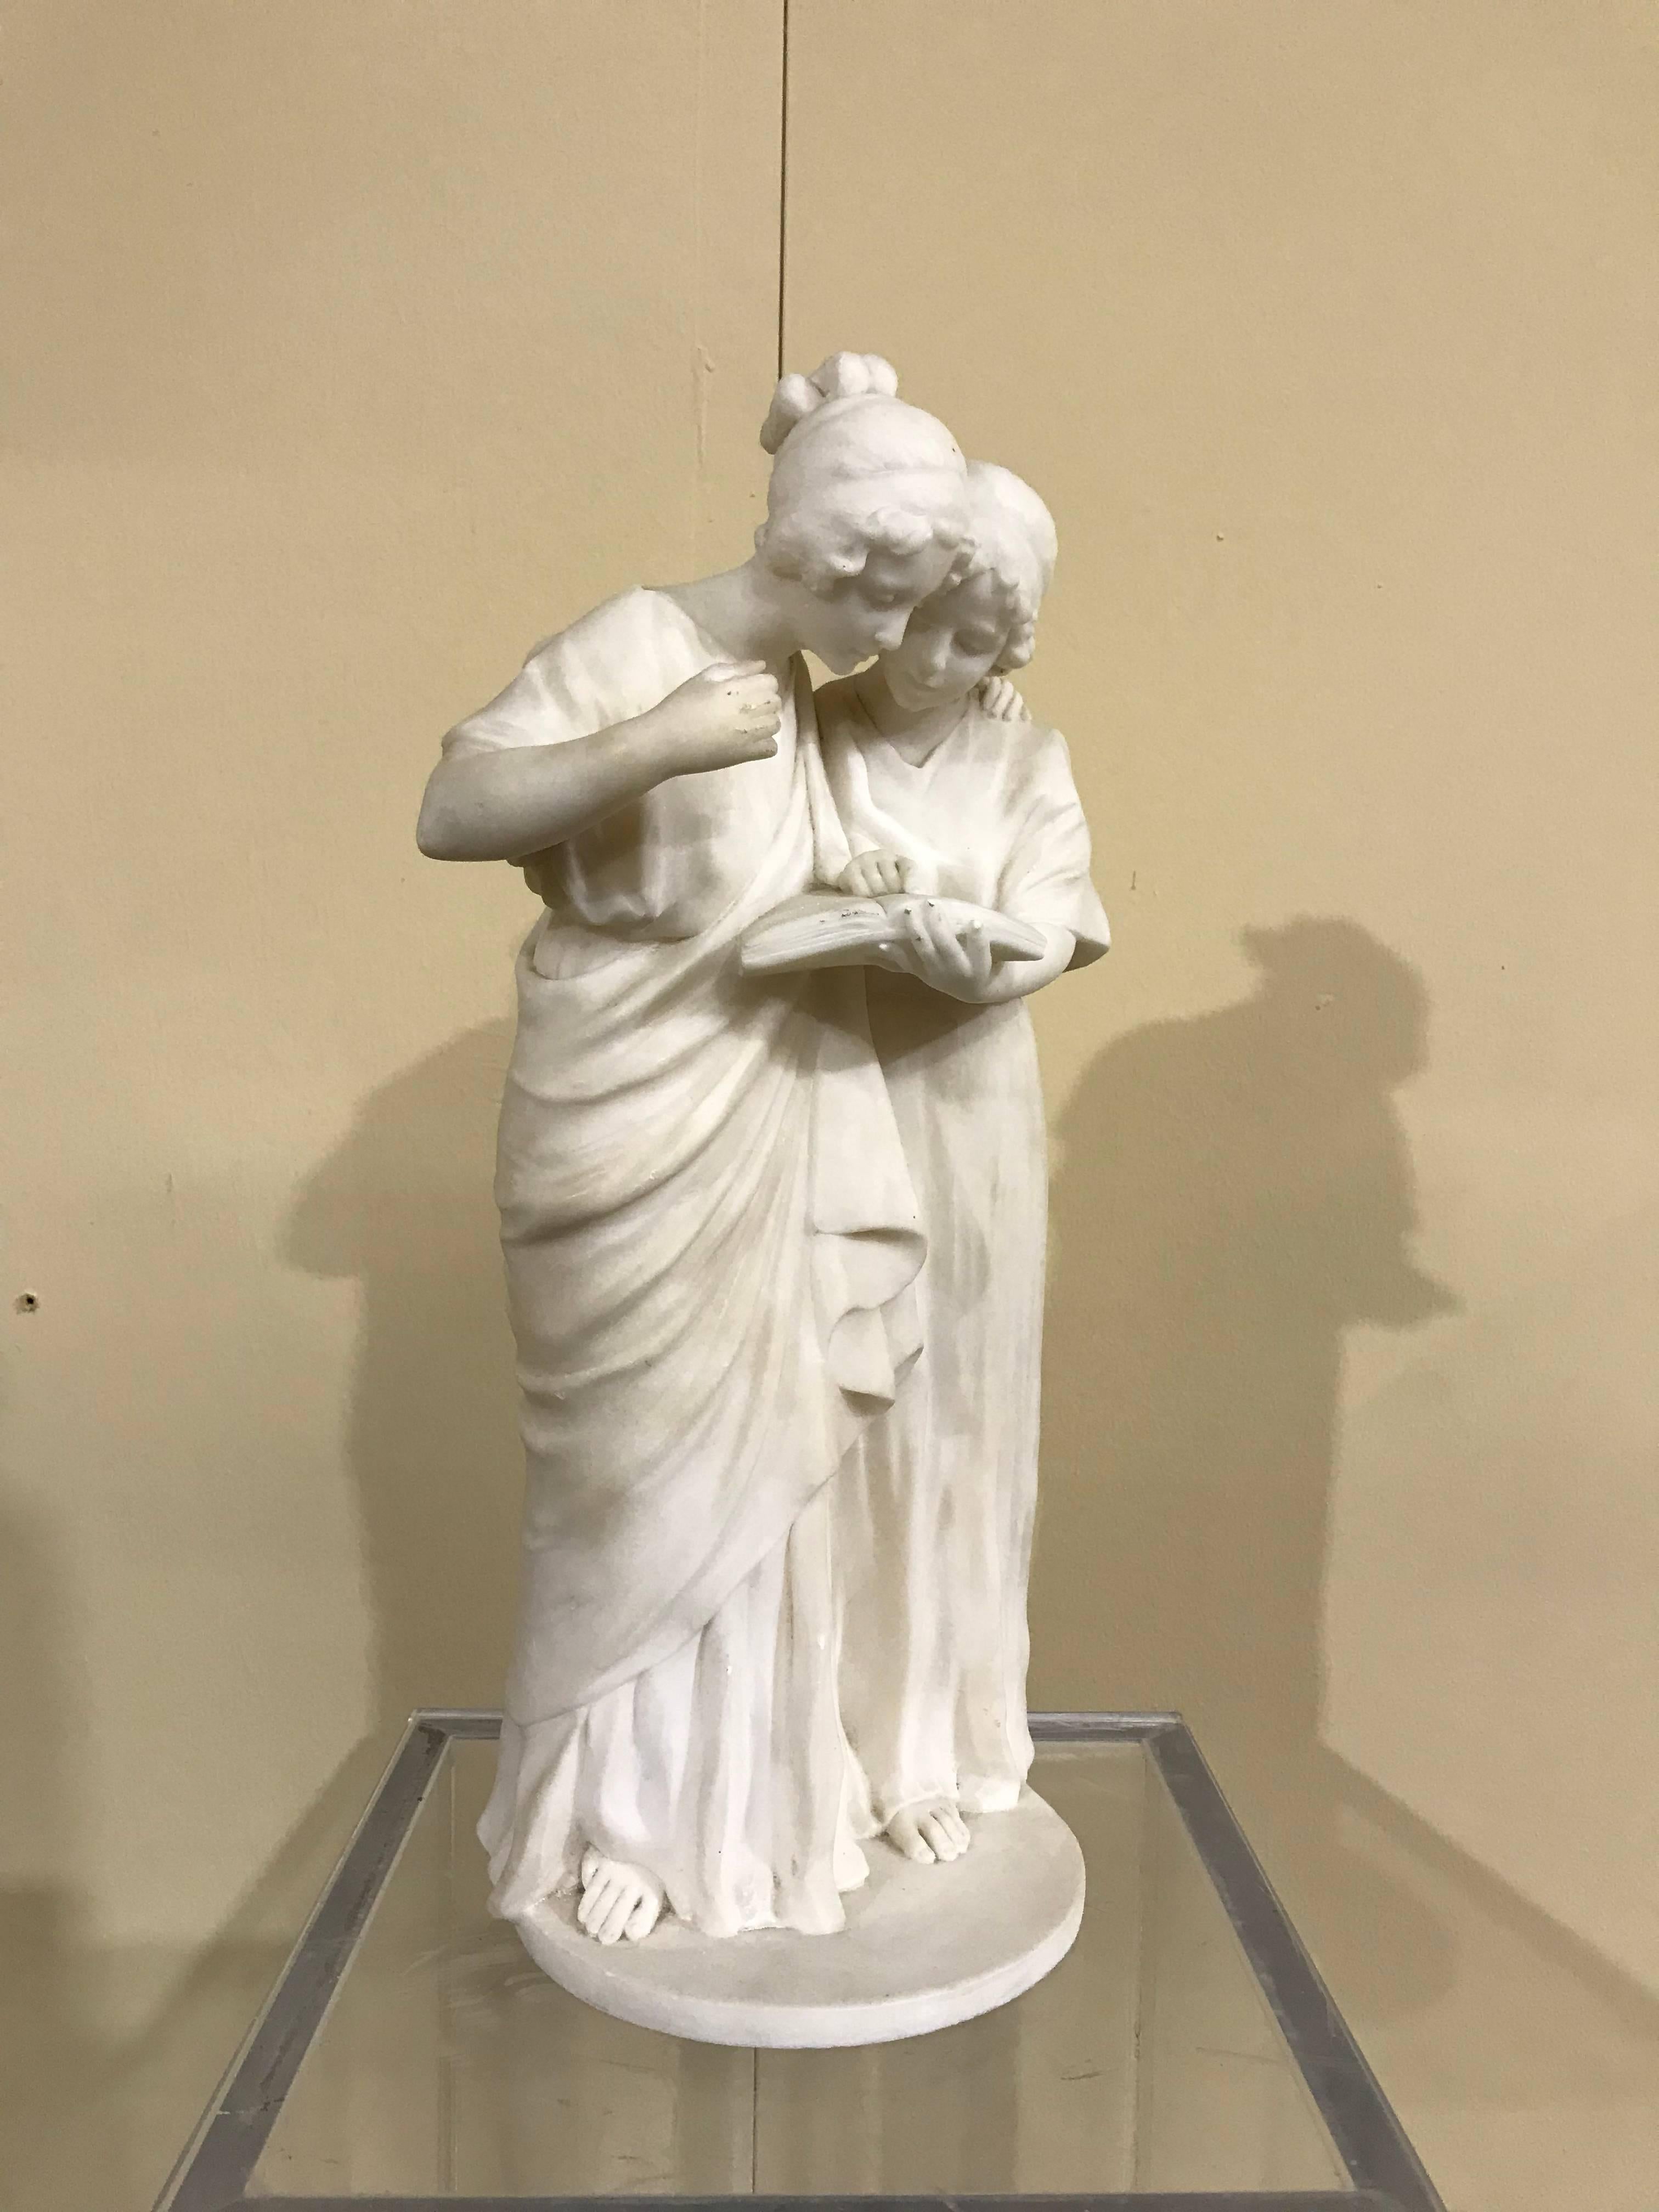 This group of Maidens portrayed in reading, is carved in Italian alabaster and is attributed to the sculptor Guglielmo Pugi, one of the most well know and active artist of that worked principally in Florence at the end of 19th century. The quality